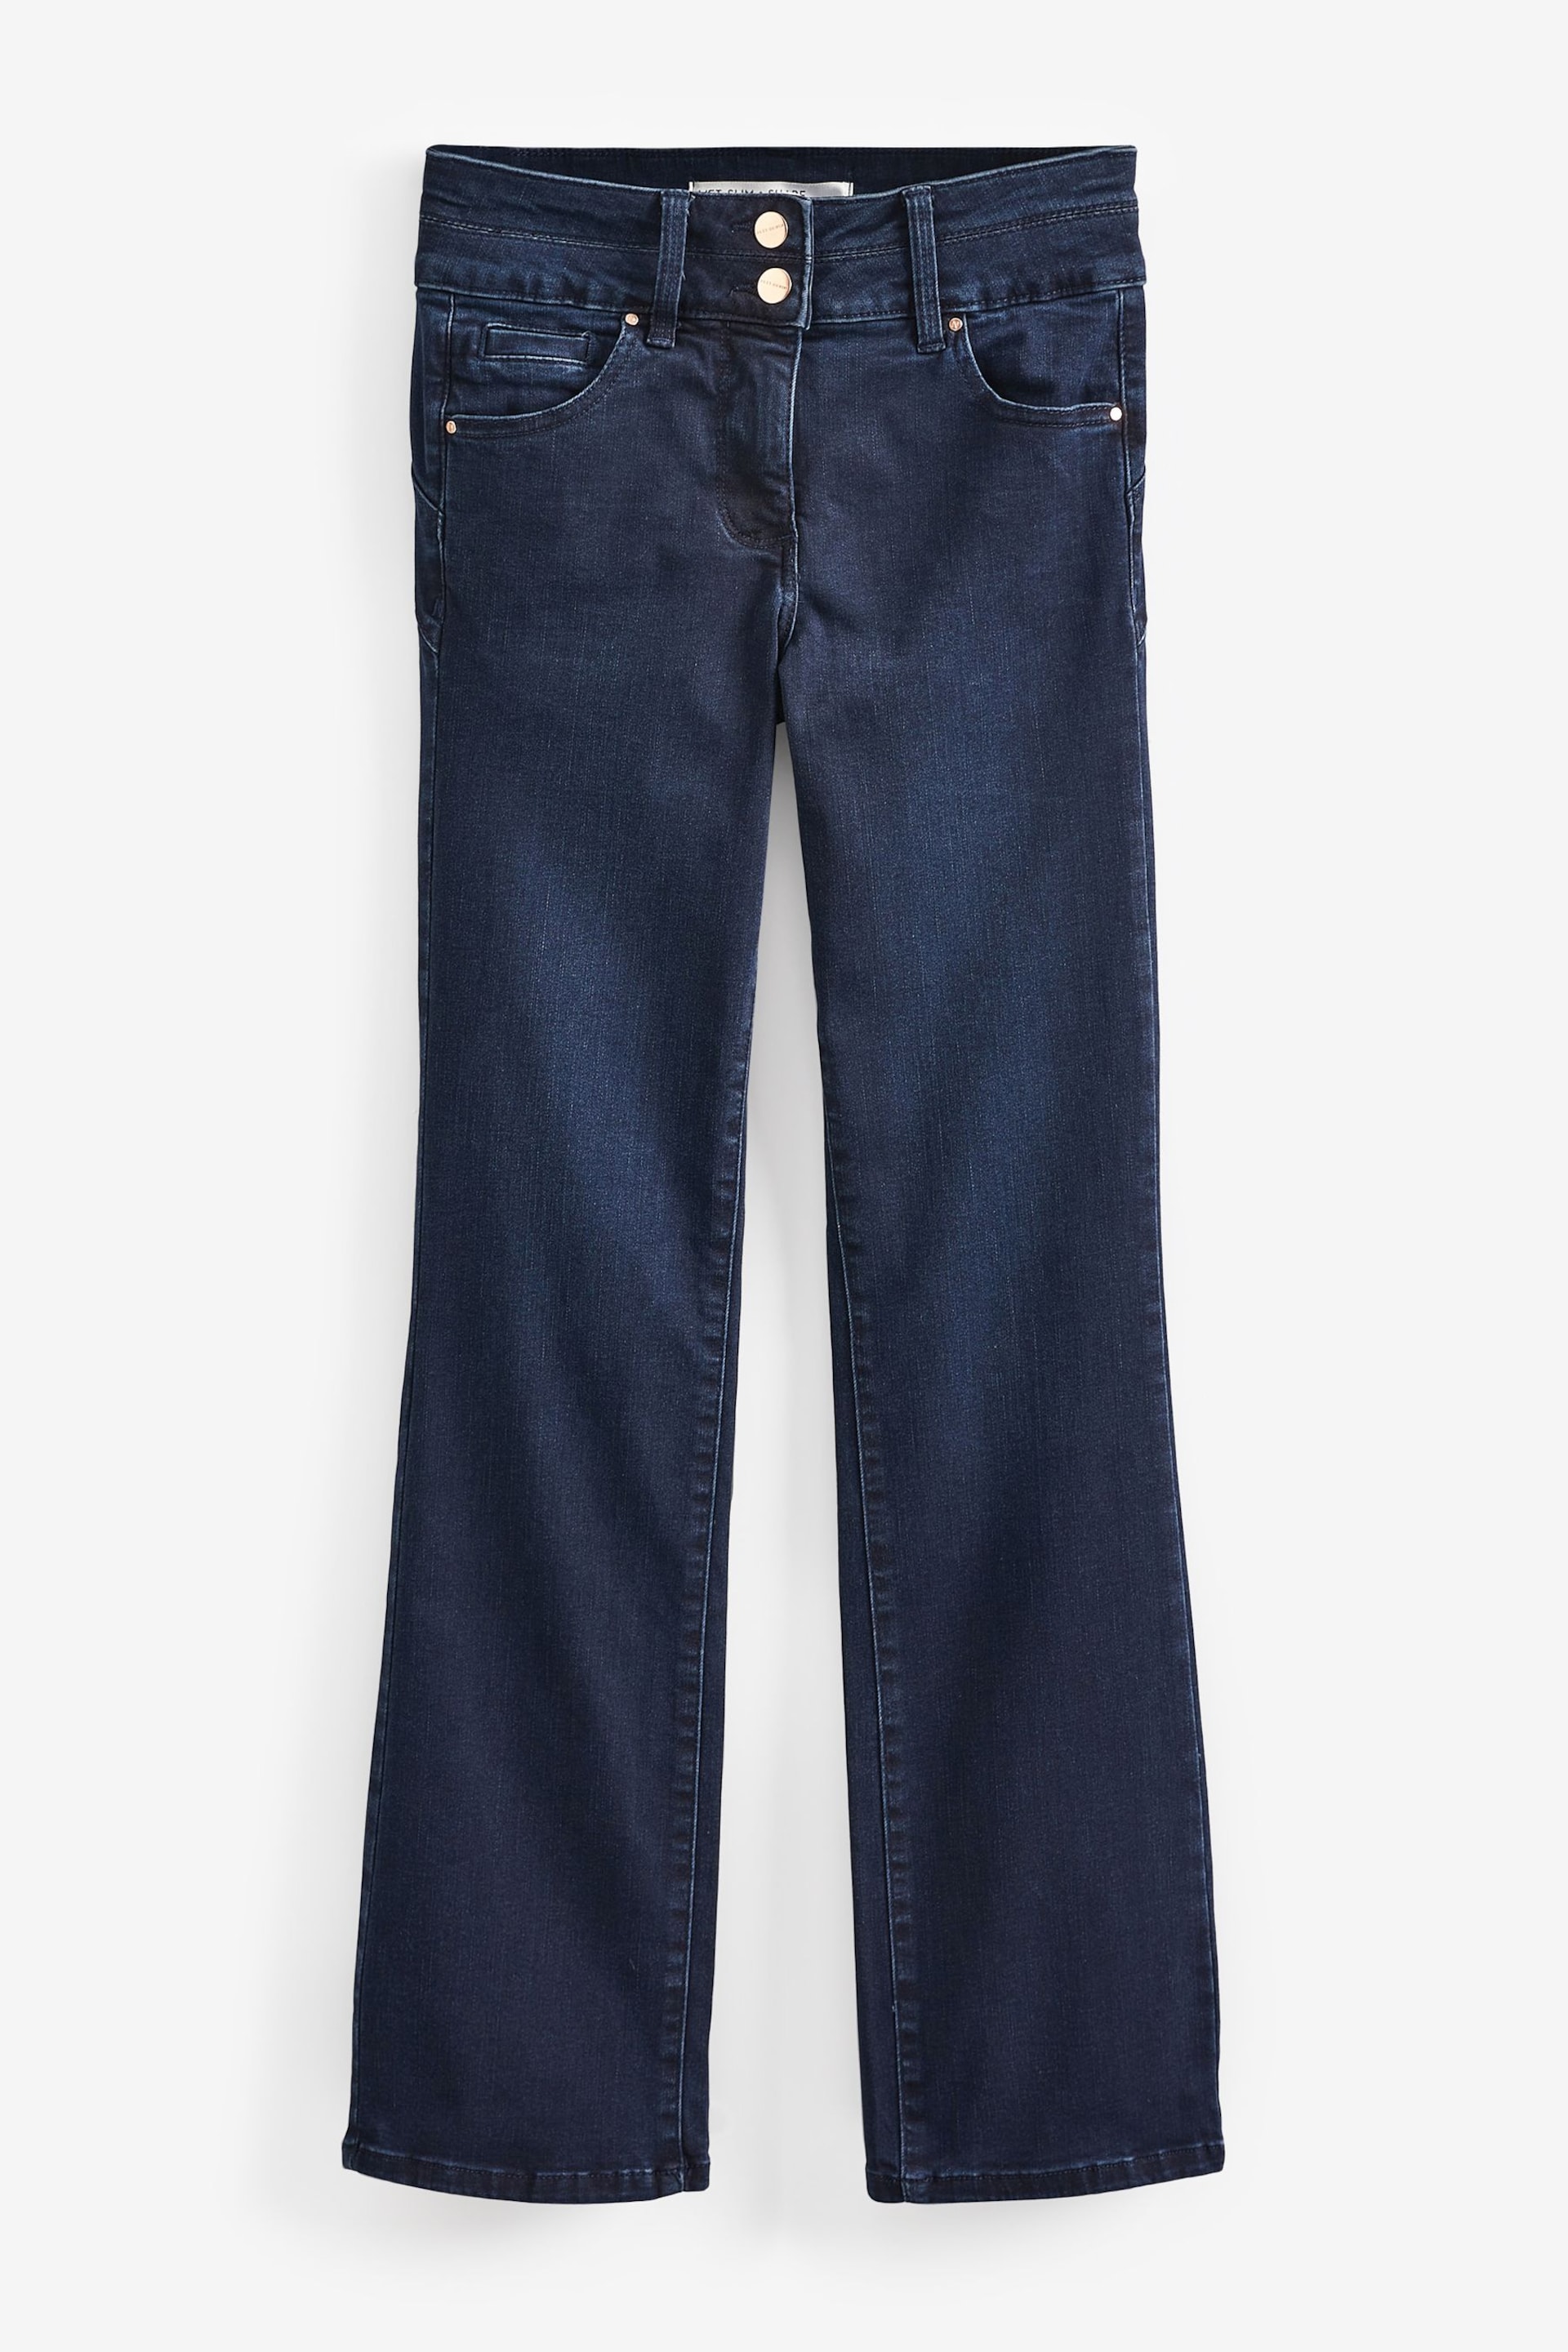 Inky Blue Denim Slim Lift And Shape Bootcut Jeans - Image 7 of 7